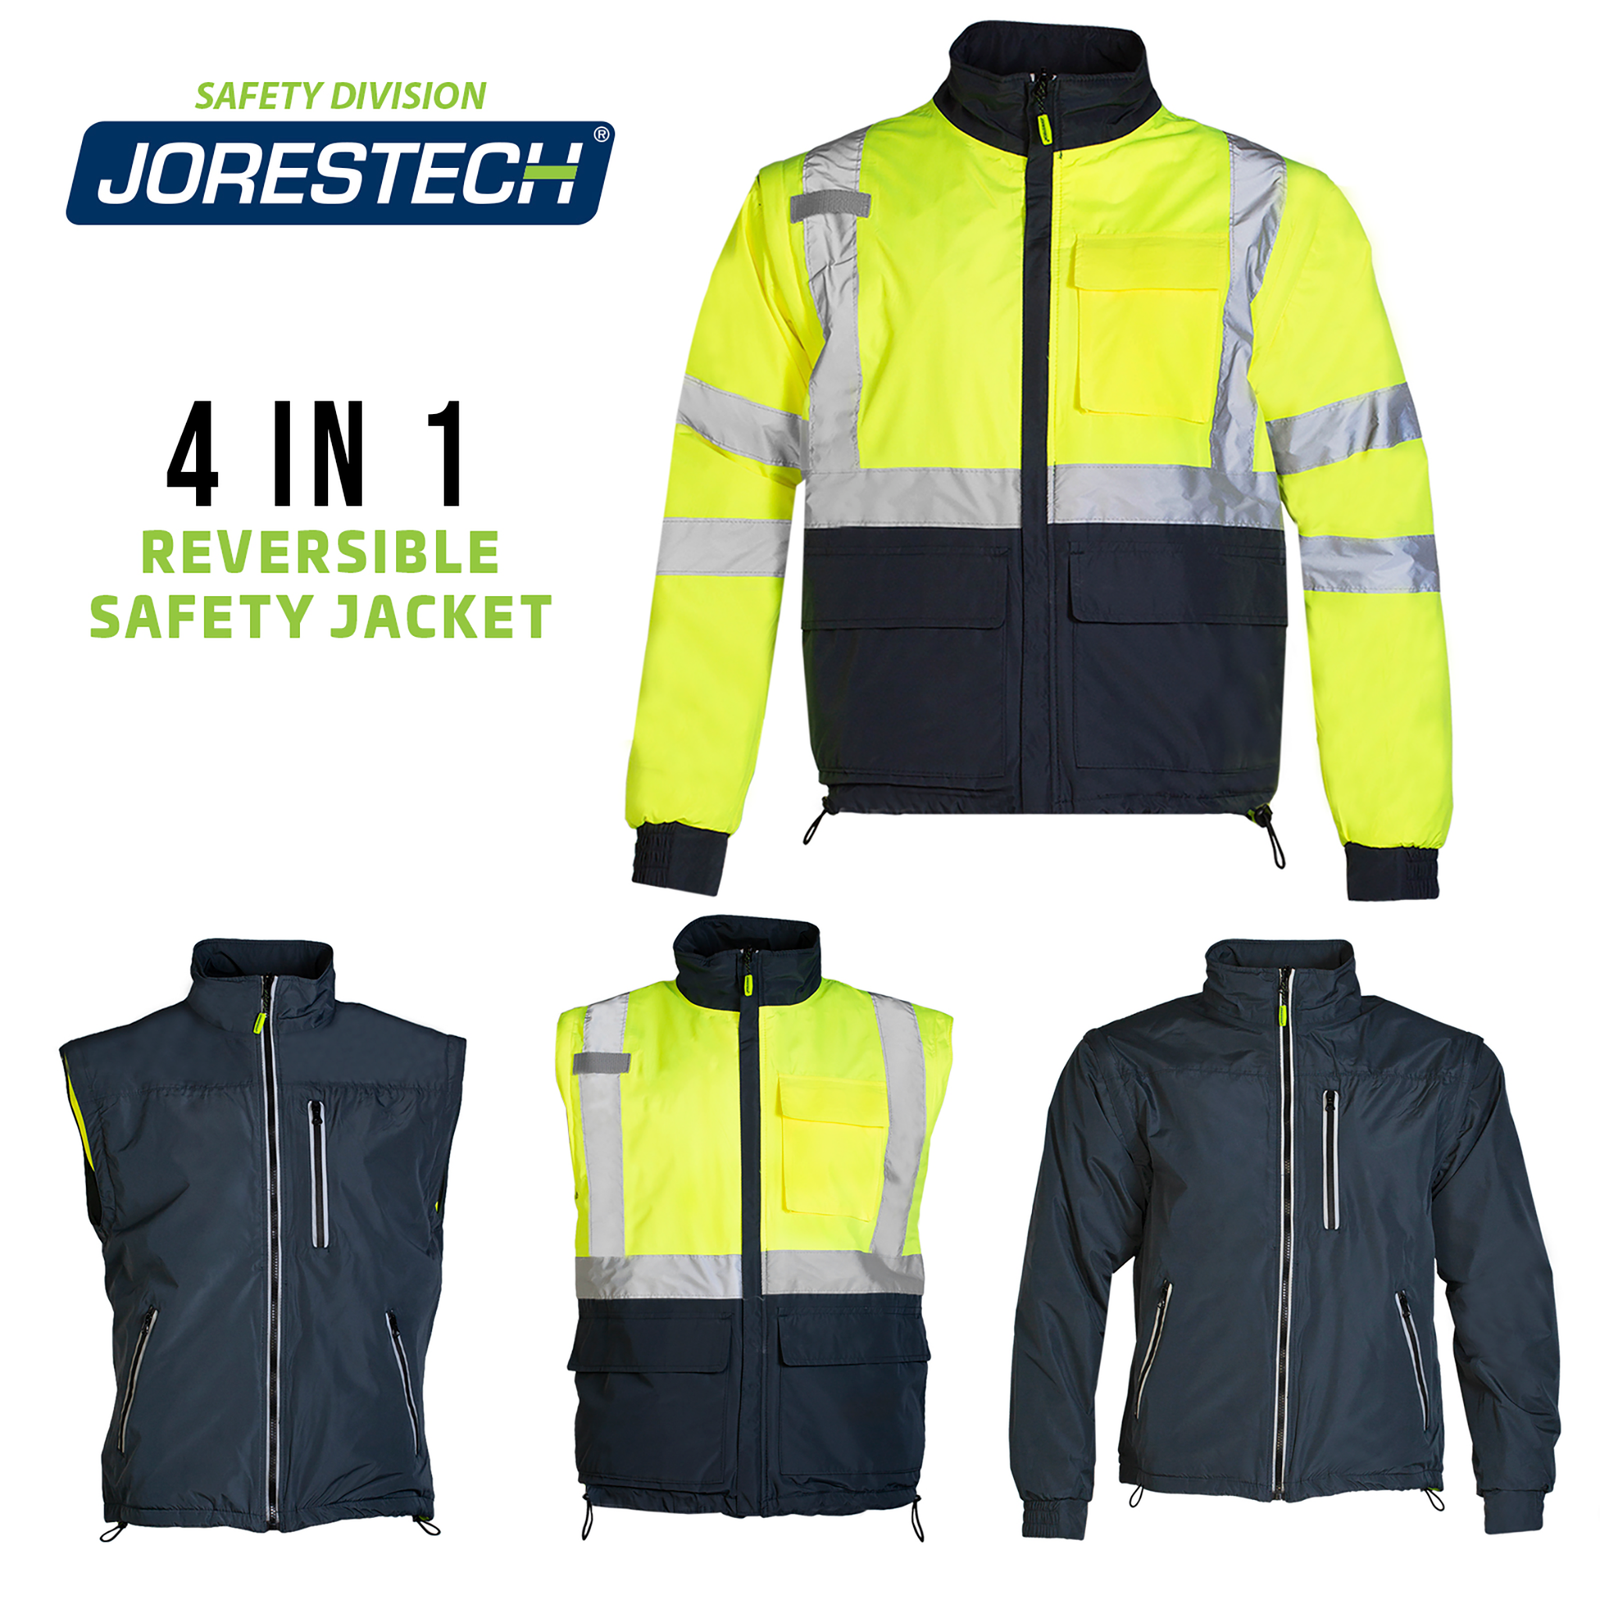 The 4 in 1 hi vis reversible safety jacket with removable sleeves .  Features views of the jacket showing: the reflective jacket. A reflective vest. A non reflective side as a vest. A non reflective jacket. Text reads 4 in 1 reversible safety jacket and vest.